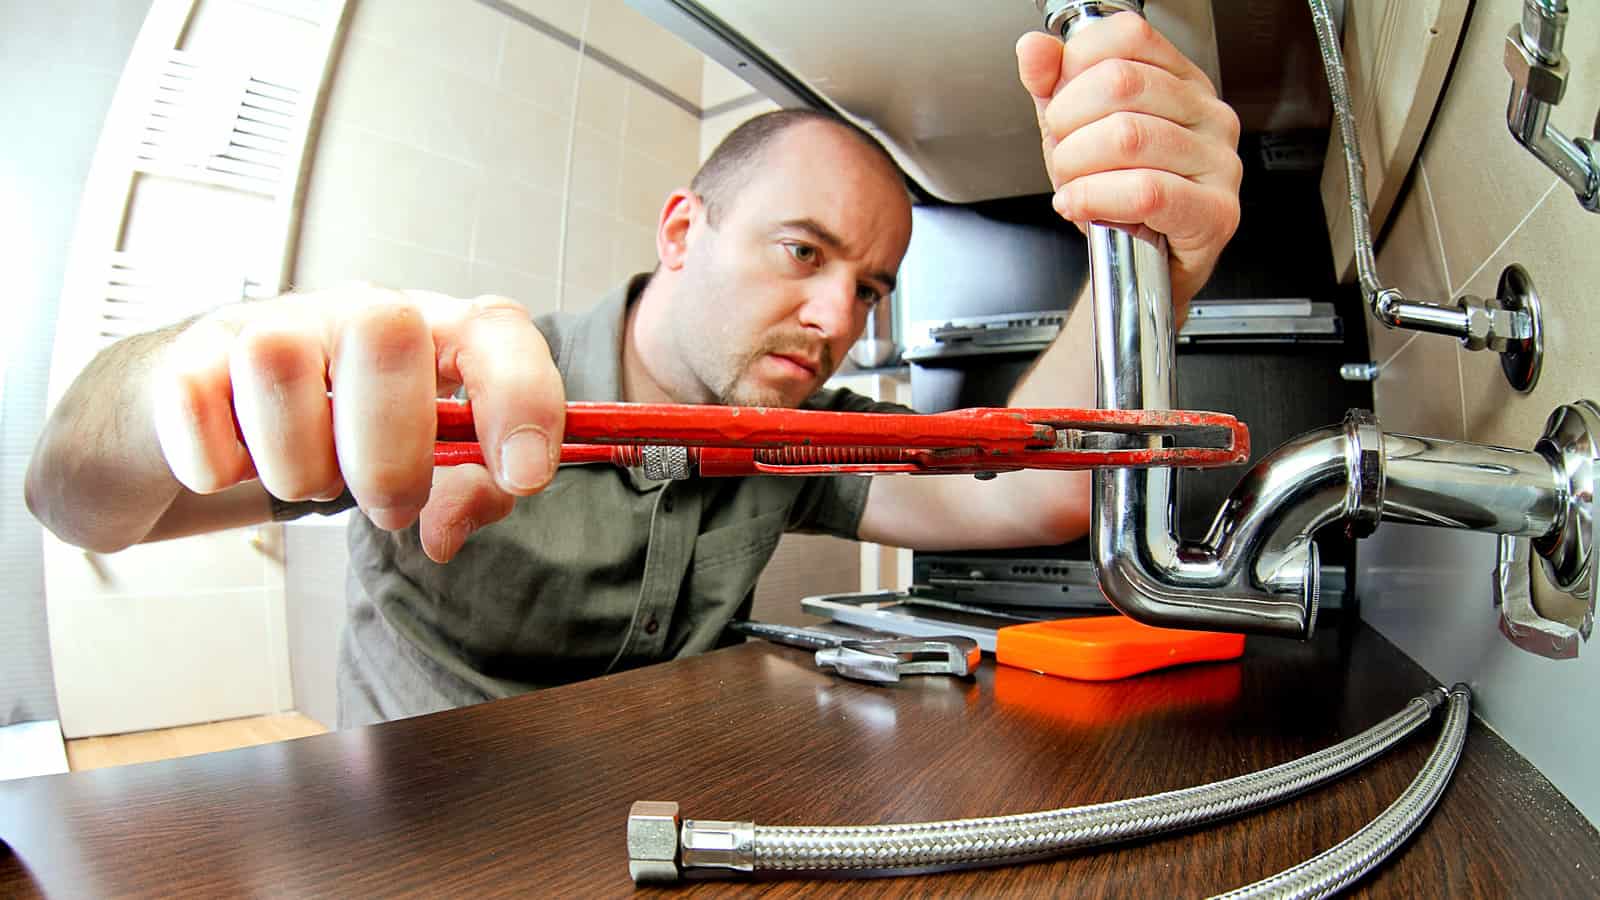 R&J PLUMBING AND BACKFLOW SERVICES of Davie